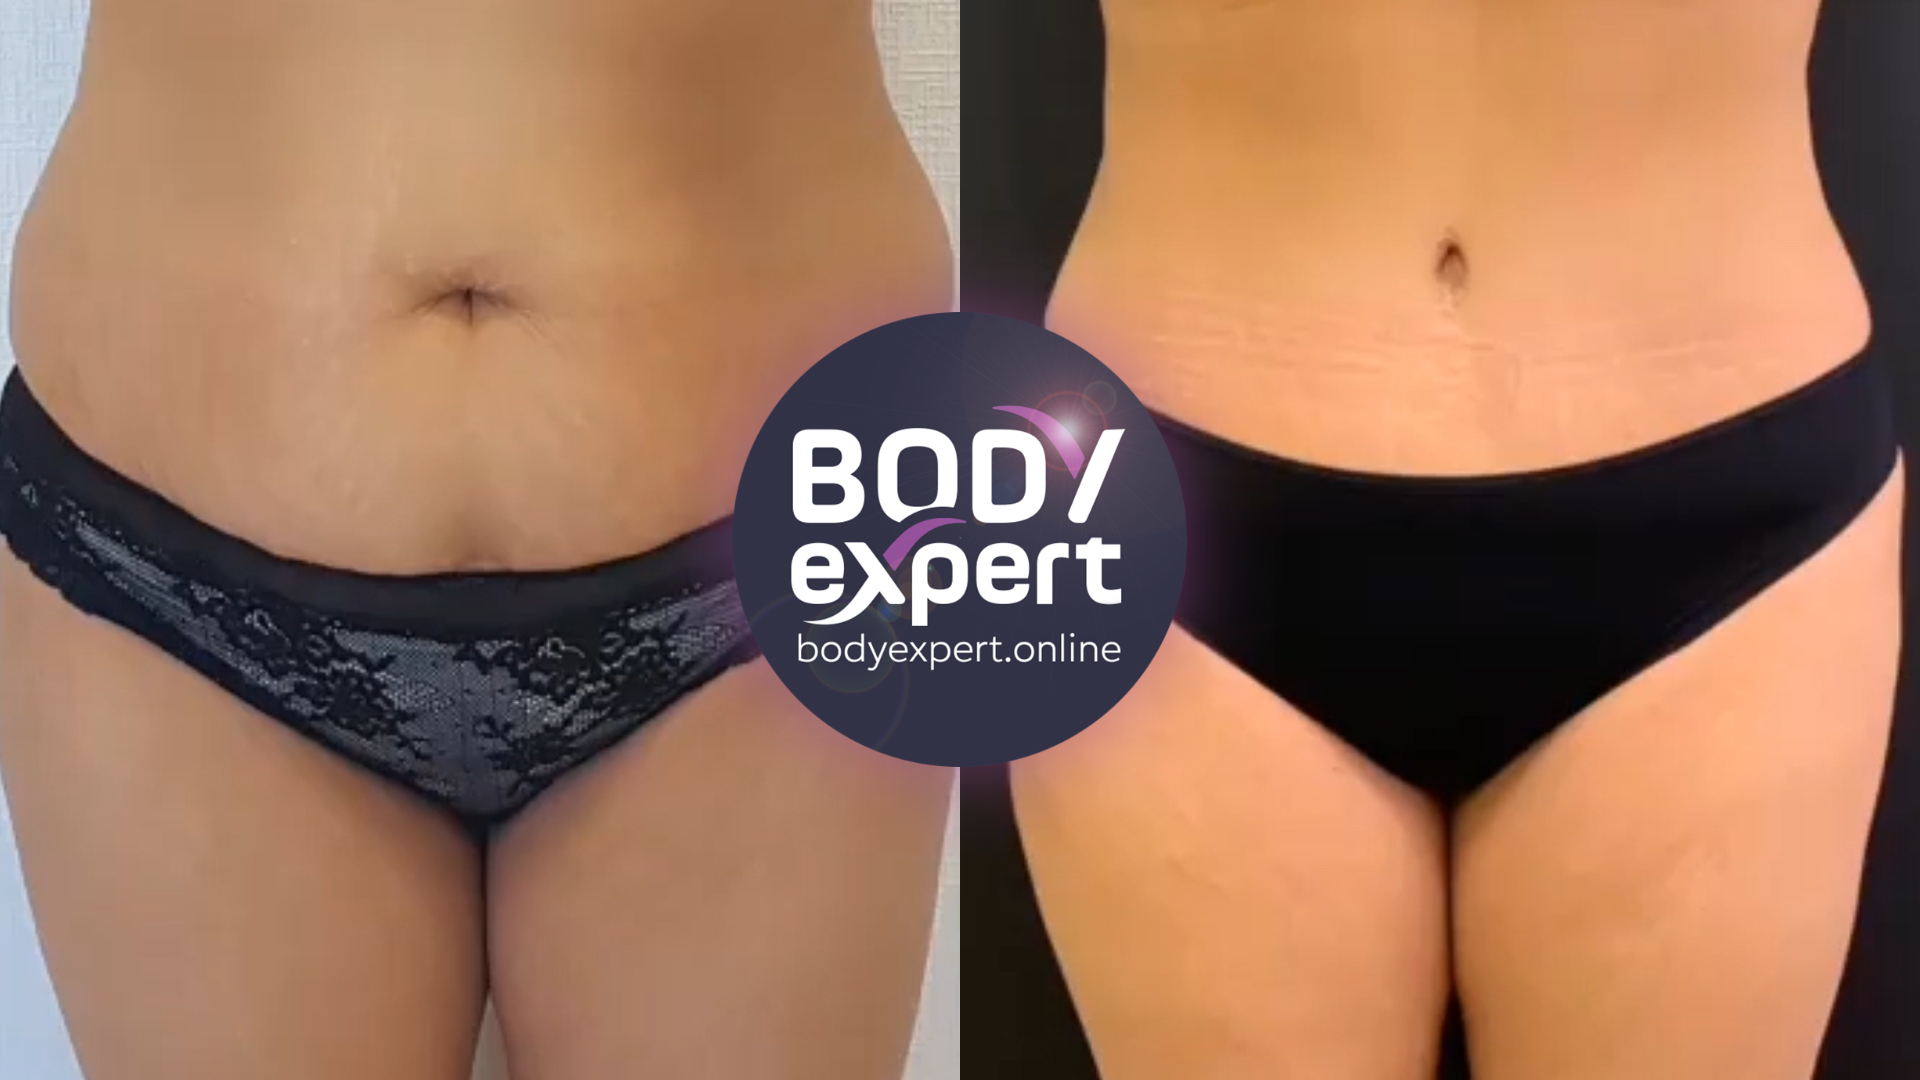 Stomach liposuction - before and after